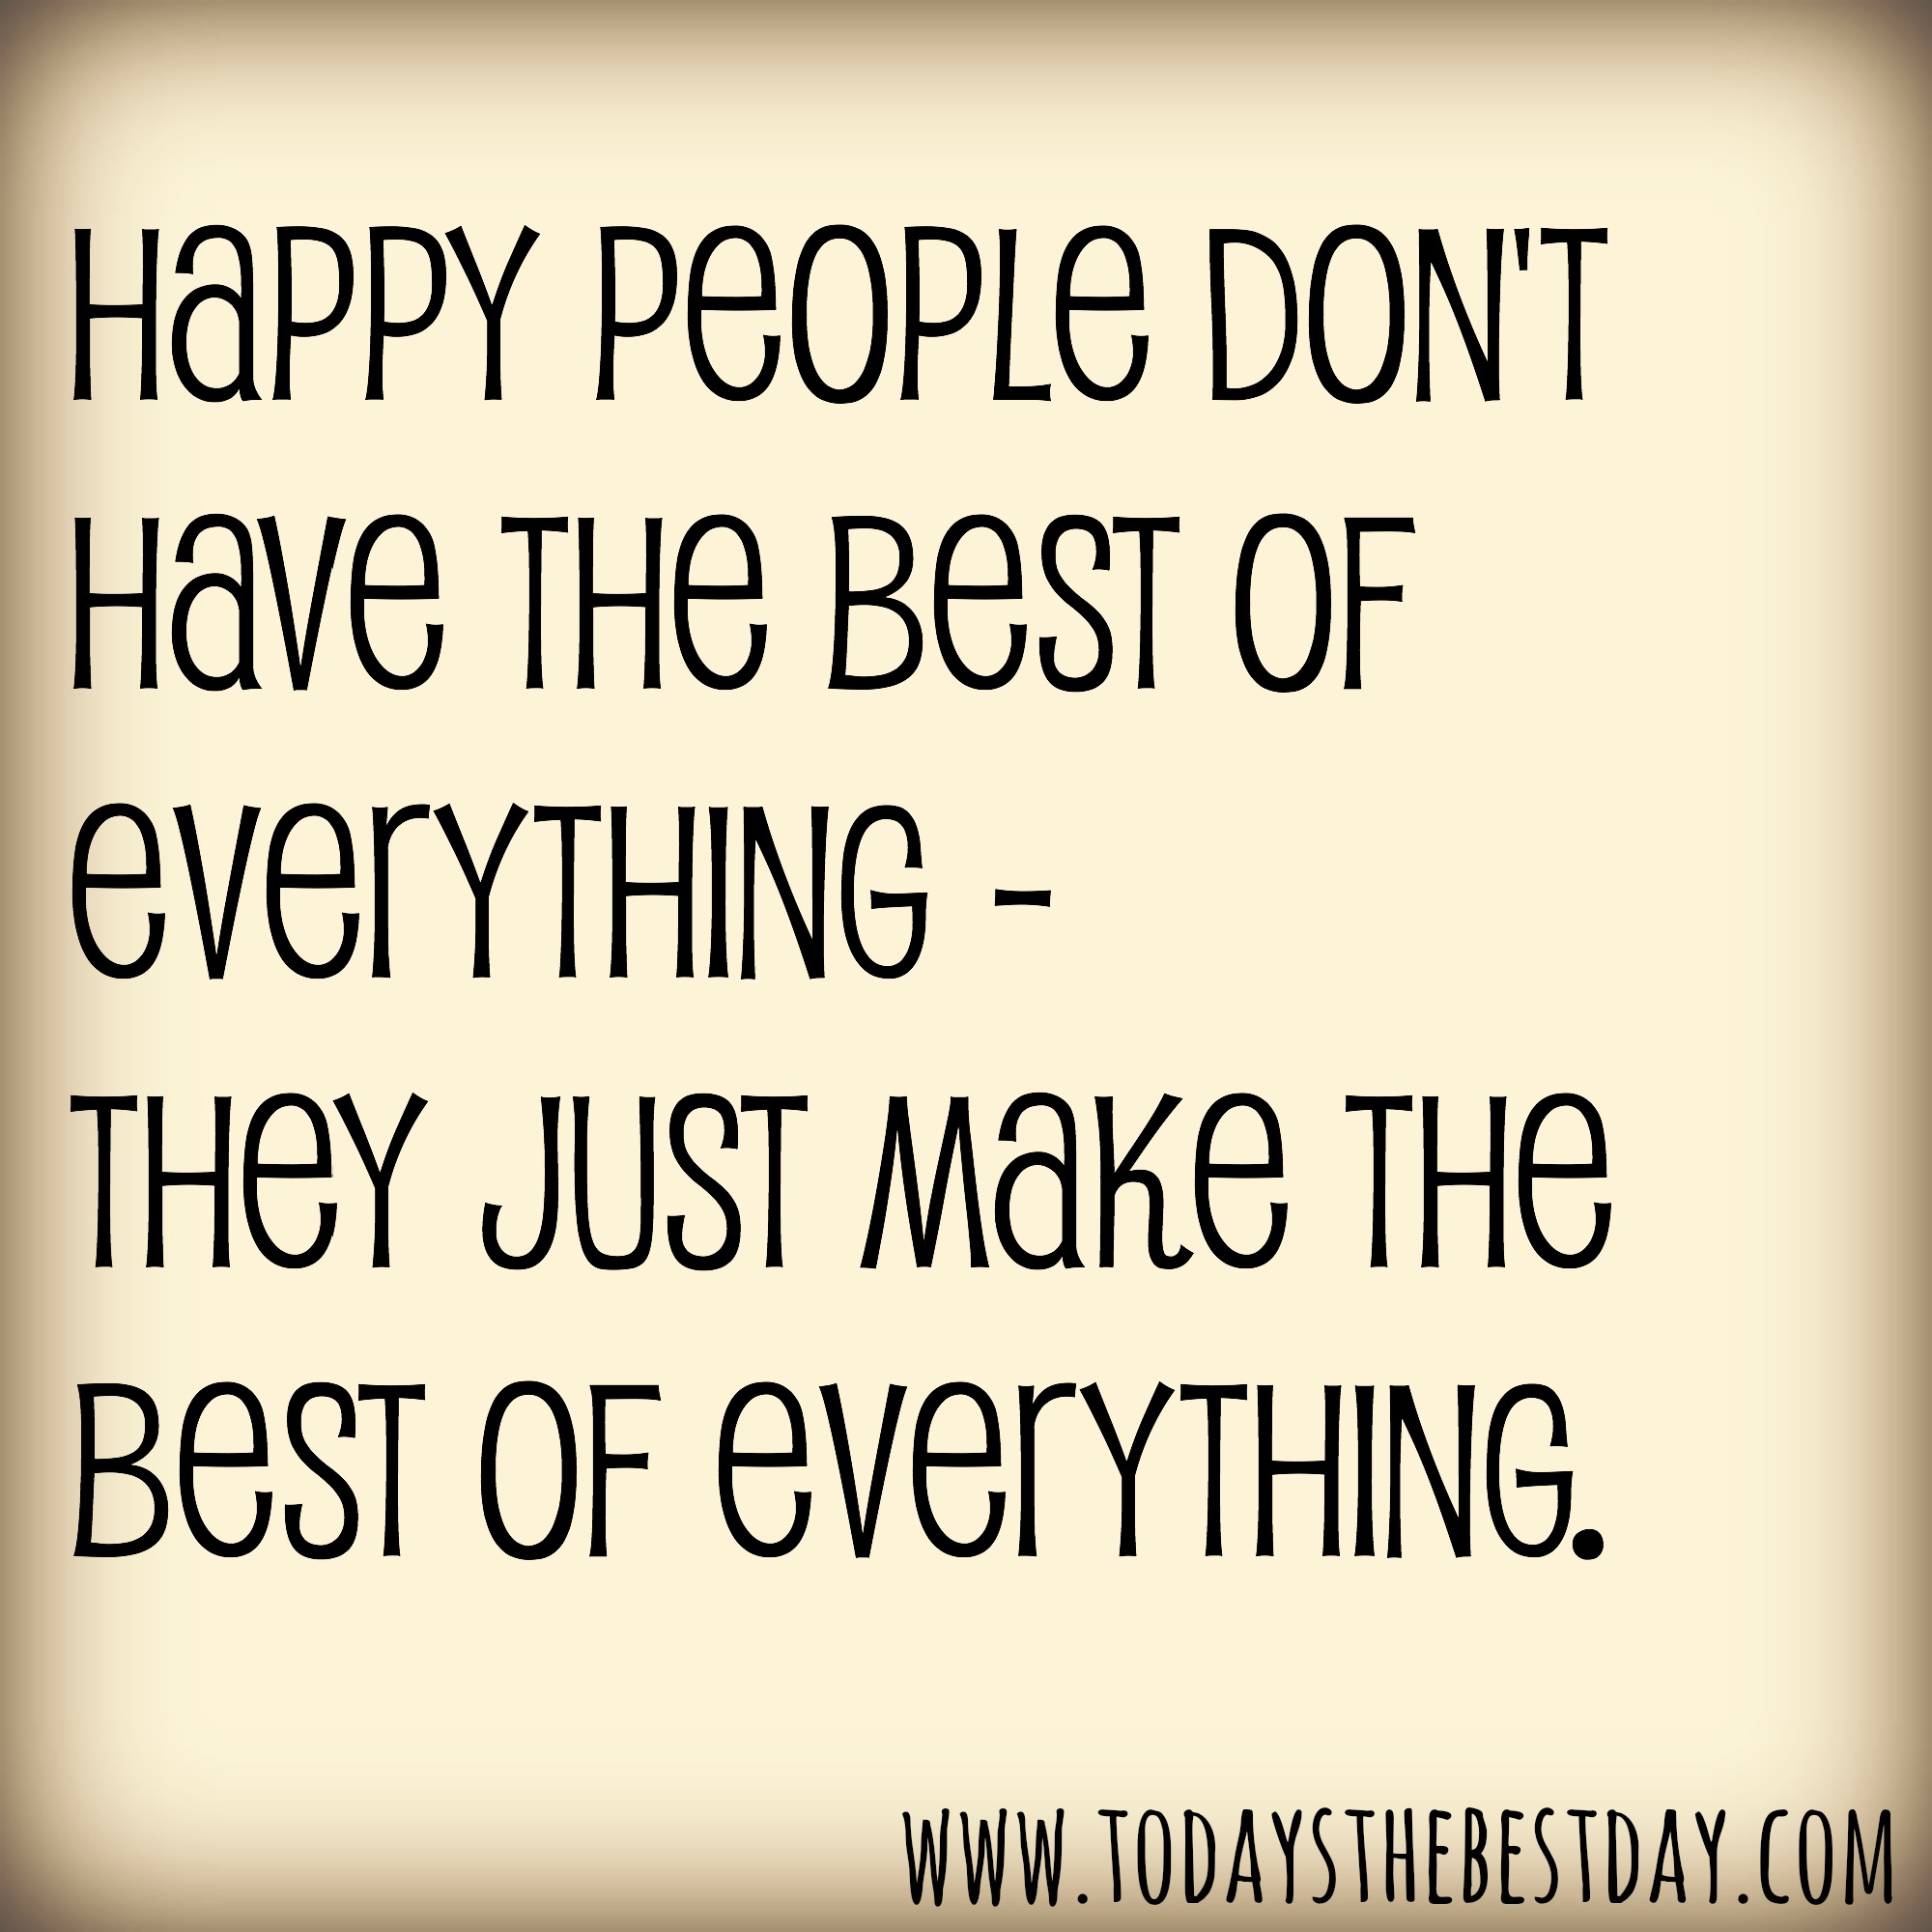 Best in everything. The best of everything. Have. Just they. Quotes about Happiness.